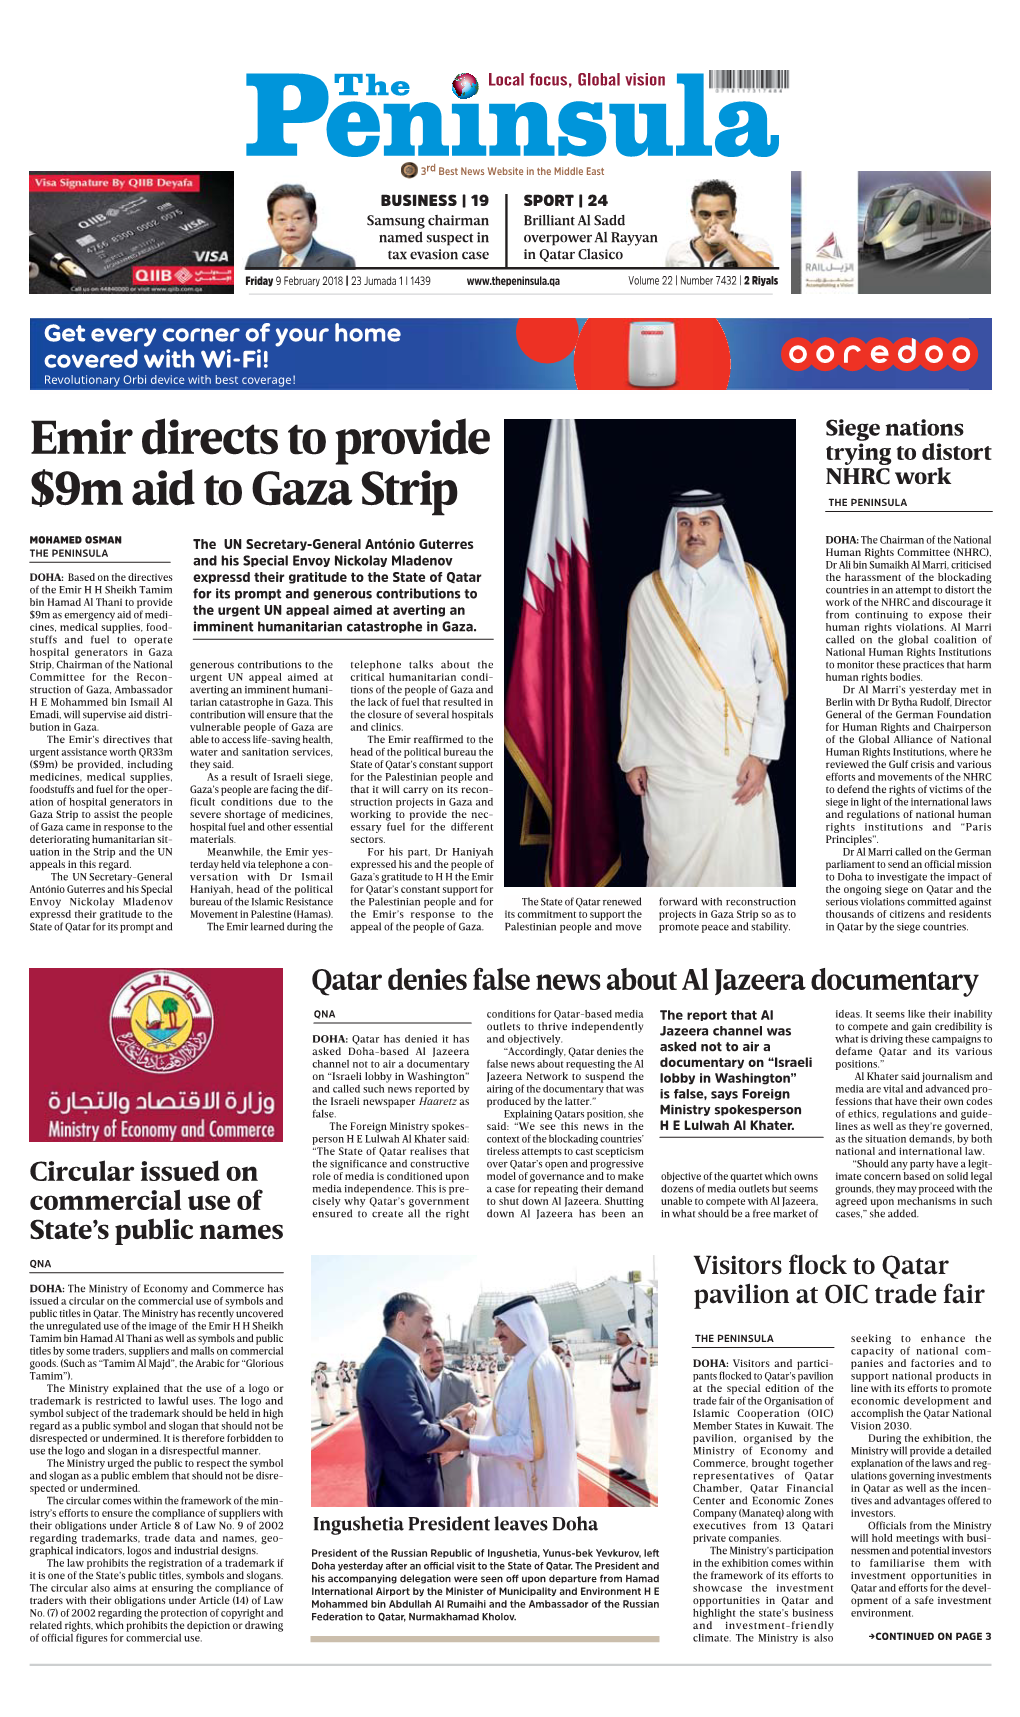 Emir Directs to Provide $9M Aid to Gaza Strip